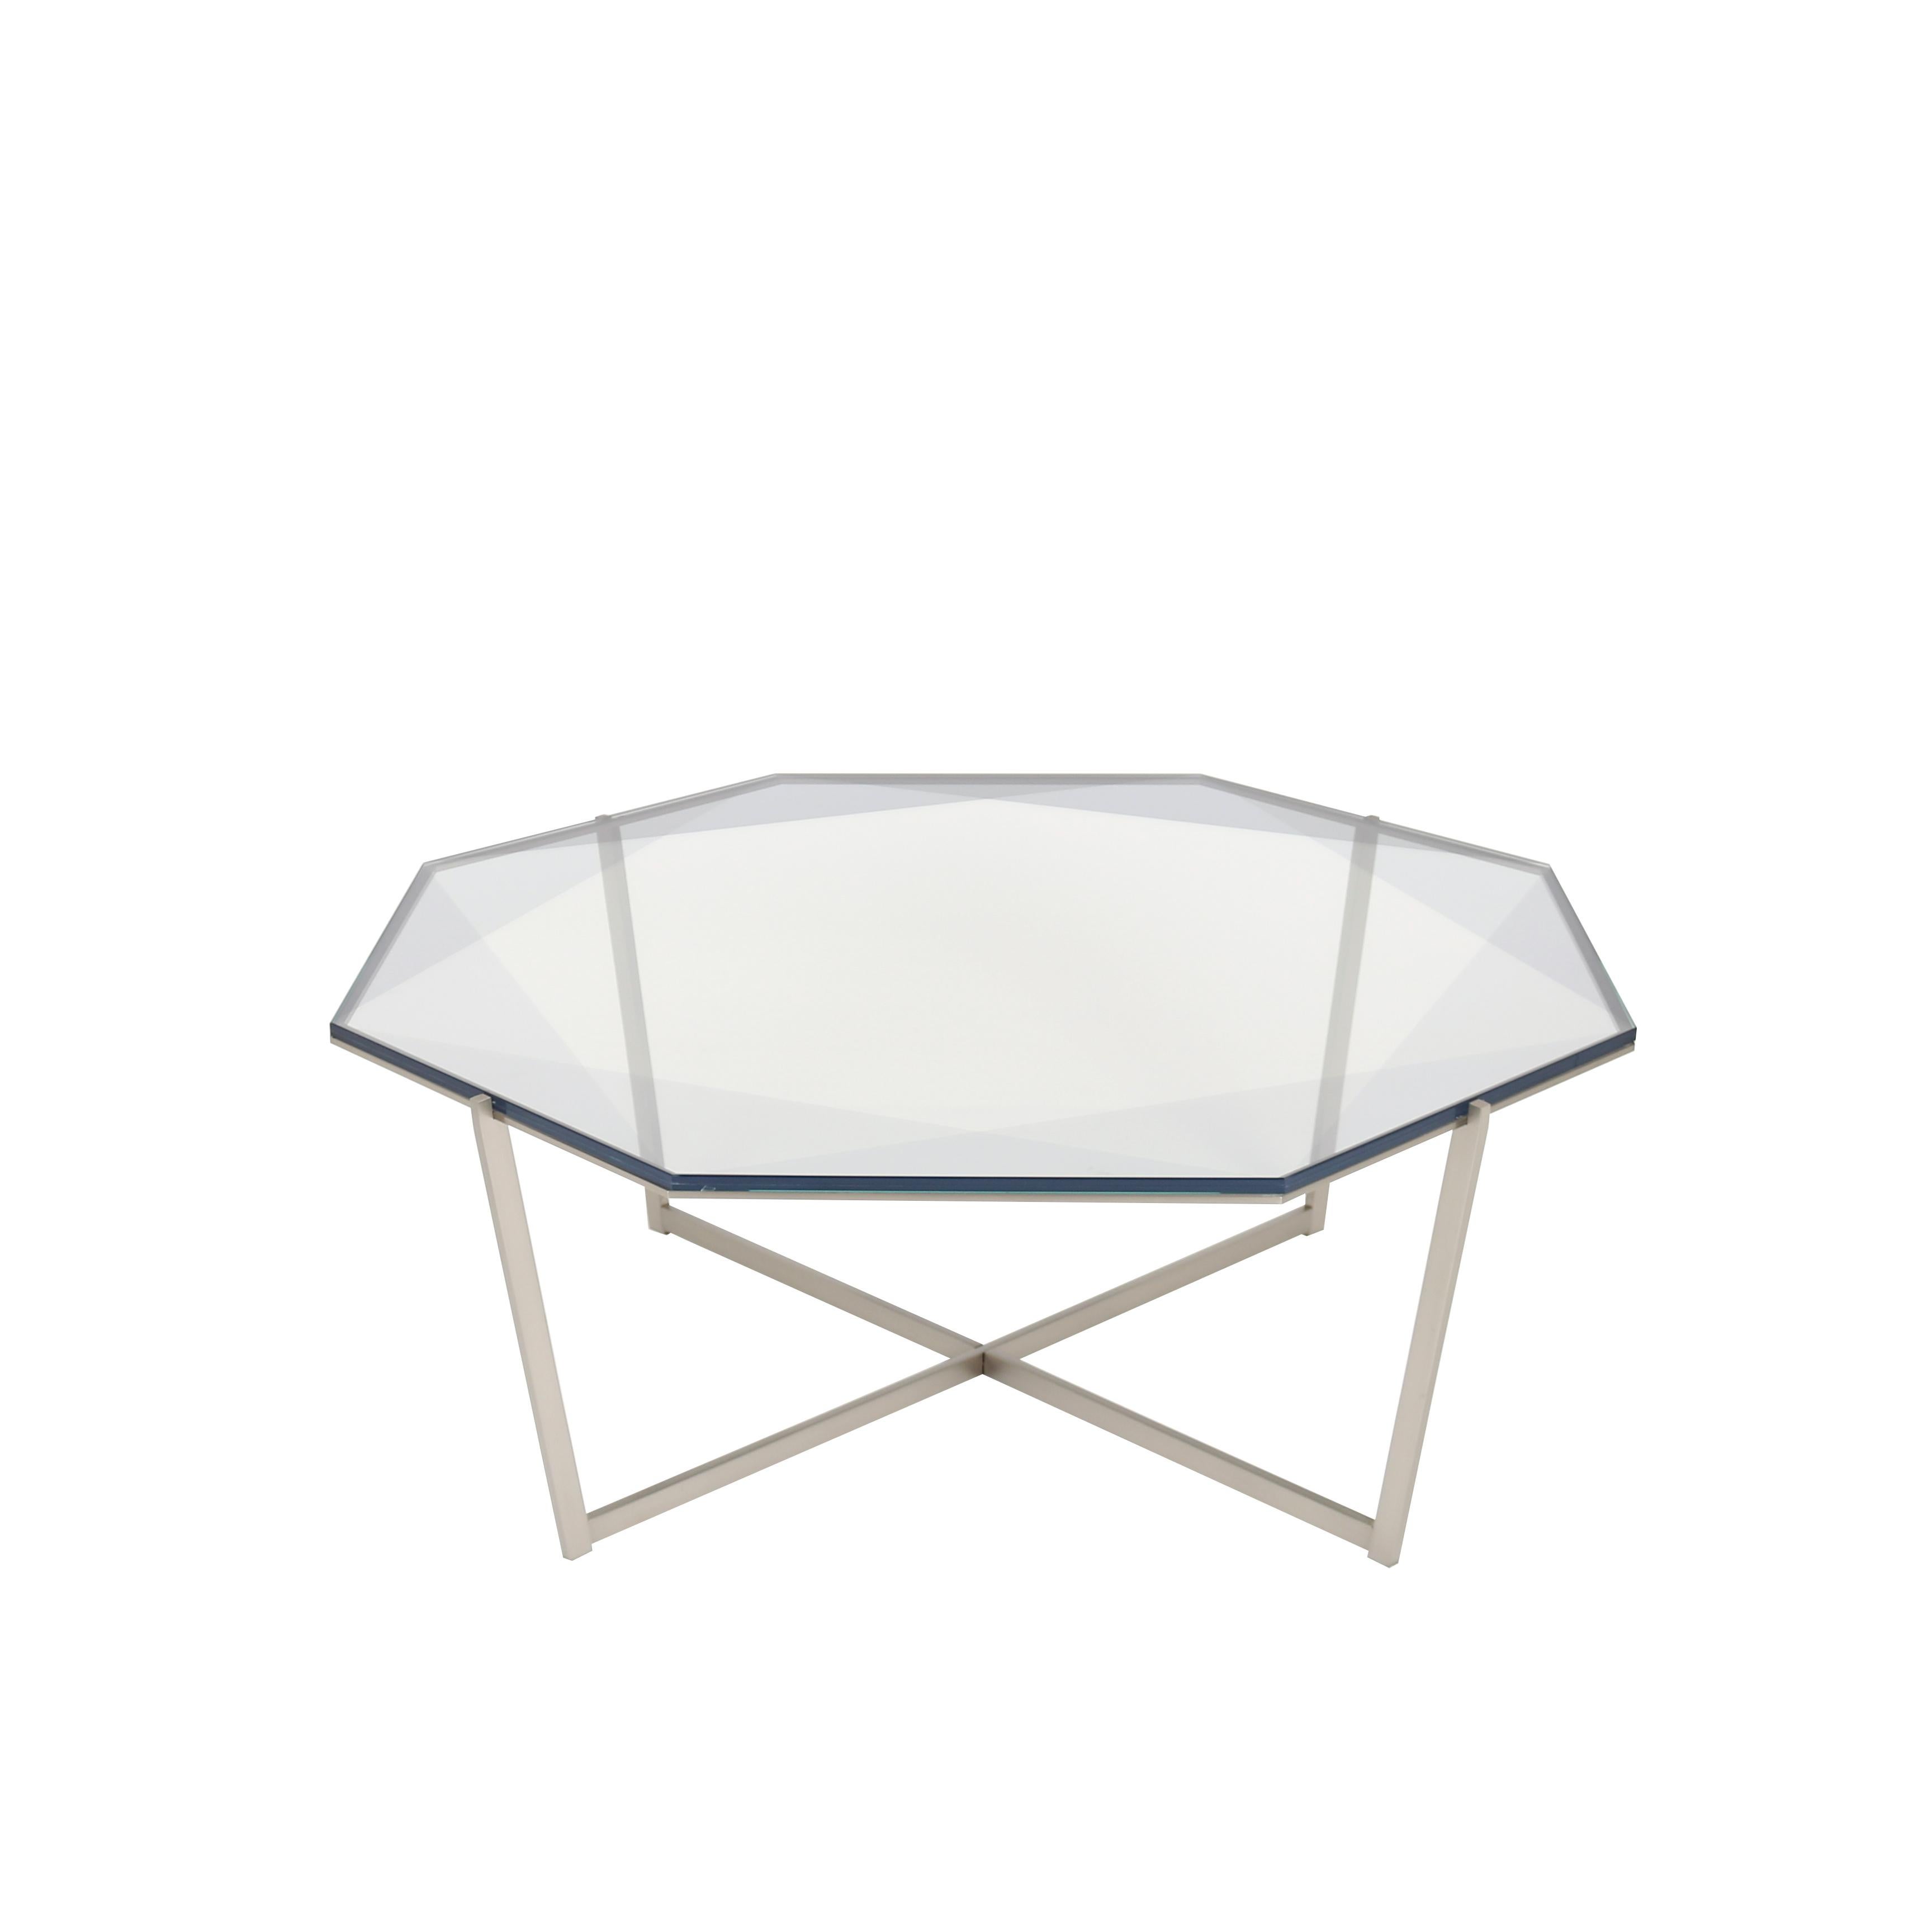 Other Gem Octagonal Coffee Table-Gray Glass with Stainless Steel Base by Debra Folz For Sale